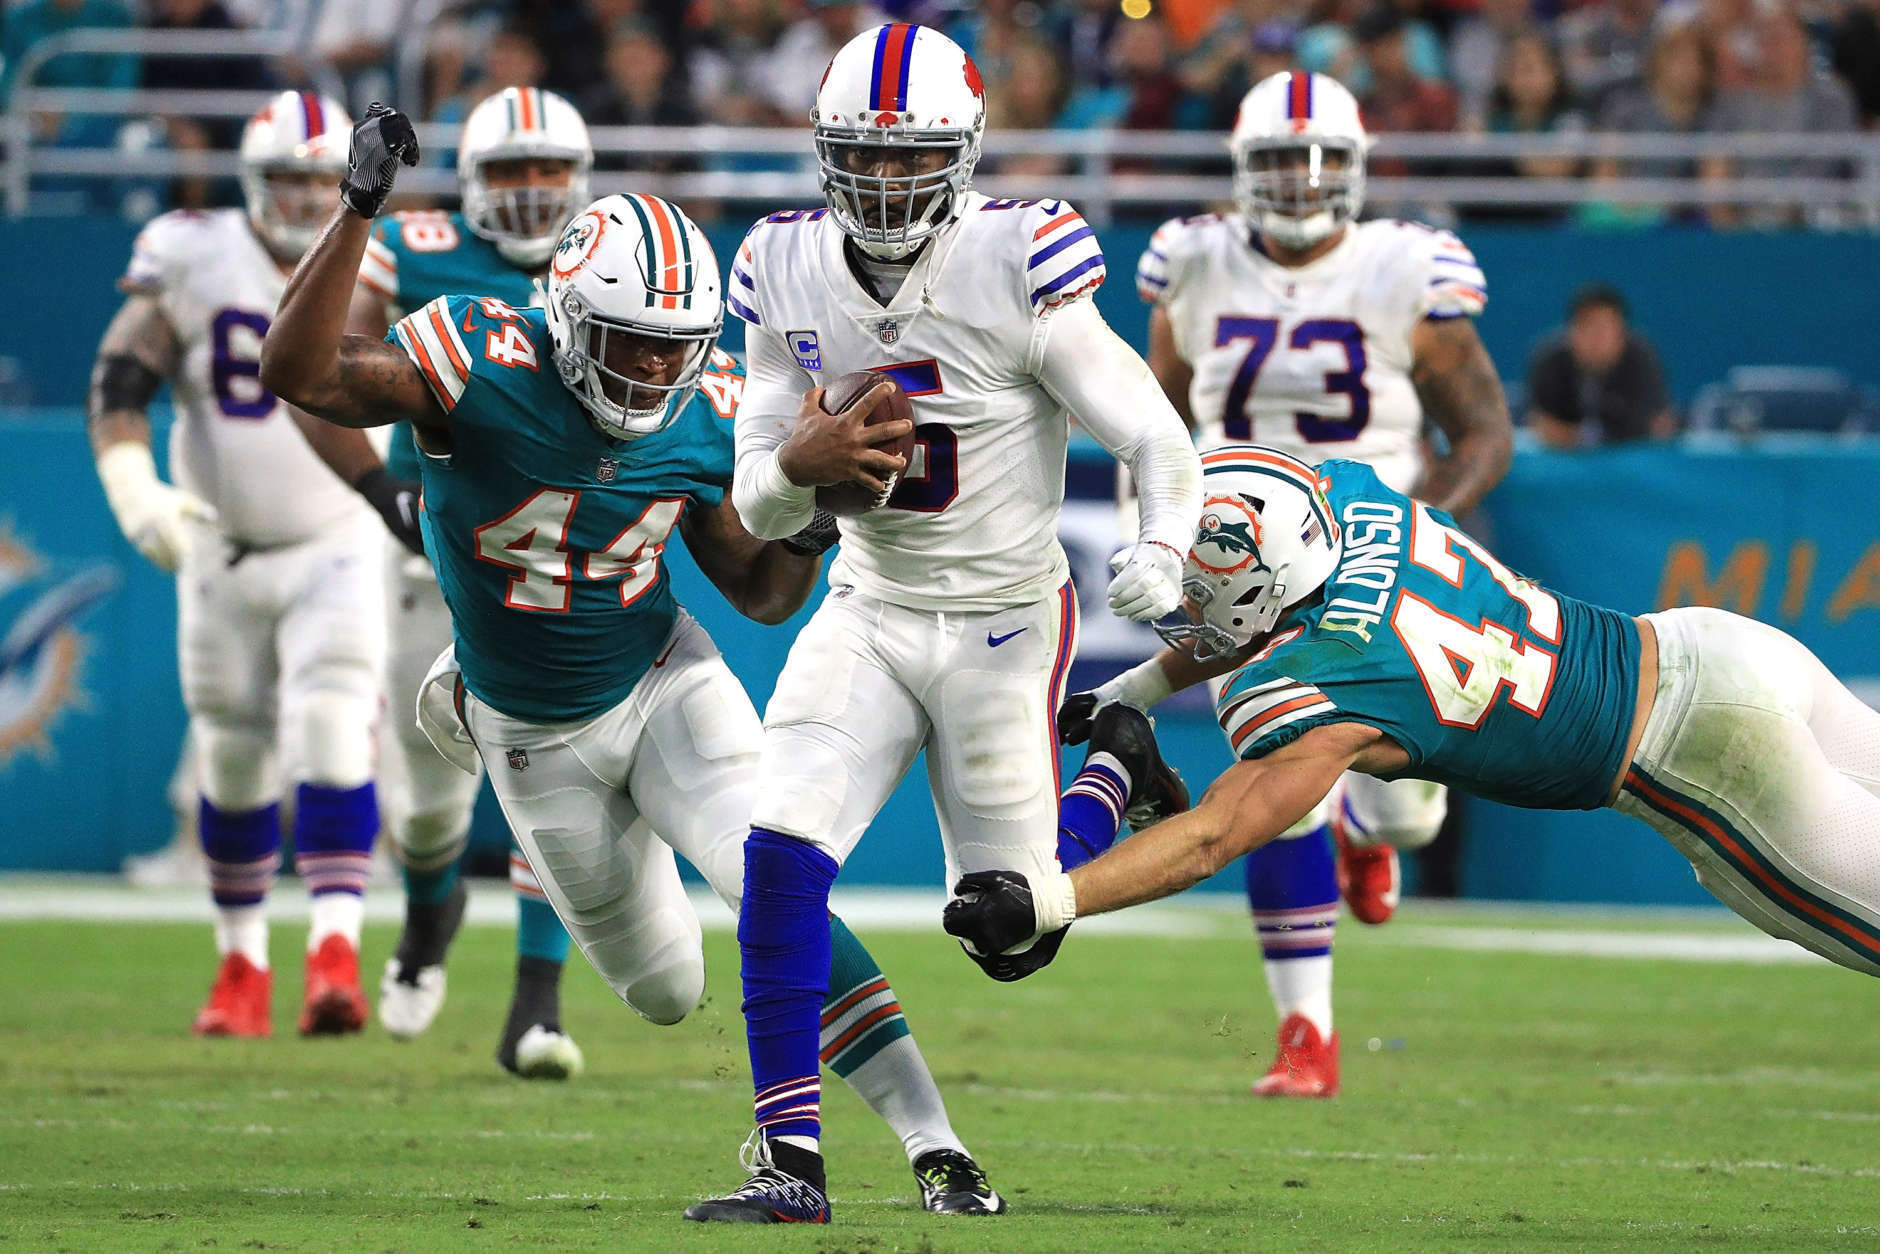 MIAMI GARDENS, FL - DECEMBER 31: Stephone Anthony #44 of the Miami Dolphins forces a fumble on Tyrod Taylor #5 of the Buffalo Bills during the second quarter against the Miami Dolphins at Hard Rock Stadium on December 31, 2017 in Miami Gardens, Florida.  (Photo by Mike Ehrmann/Getty Images)